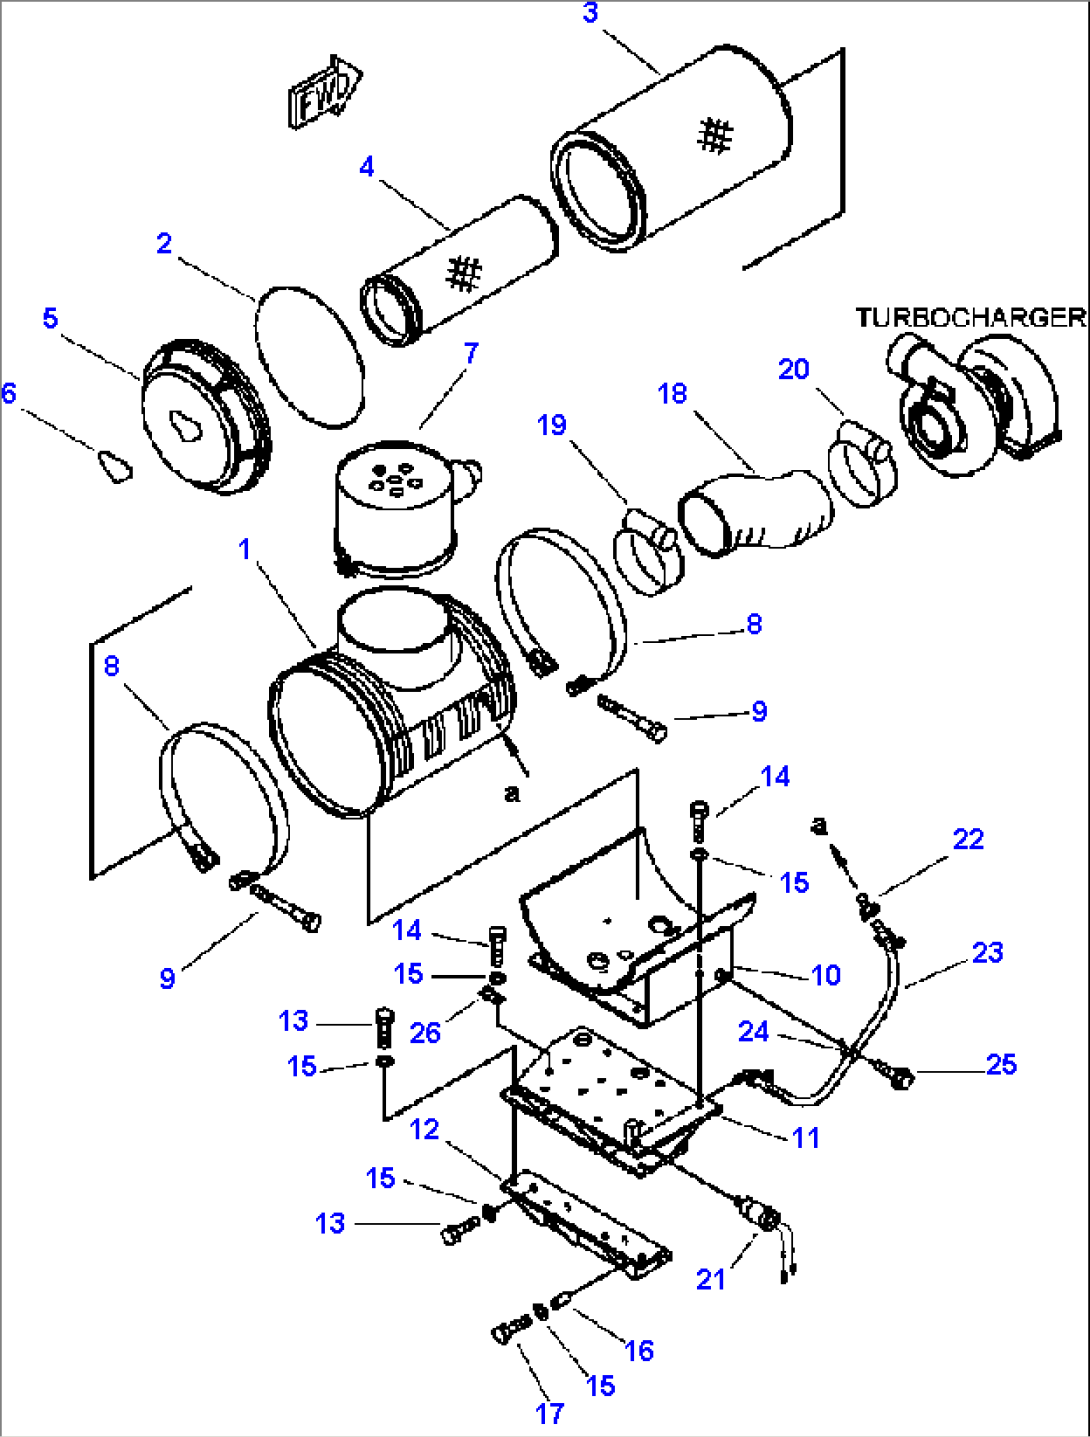 FIG. A1410-A6H5 AIR CLEANER MOUNTING